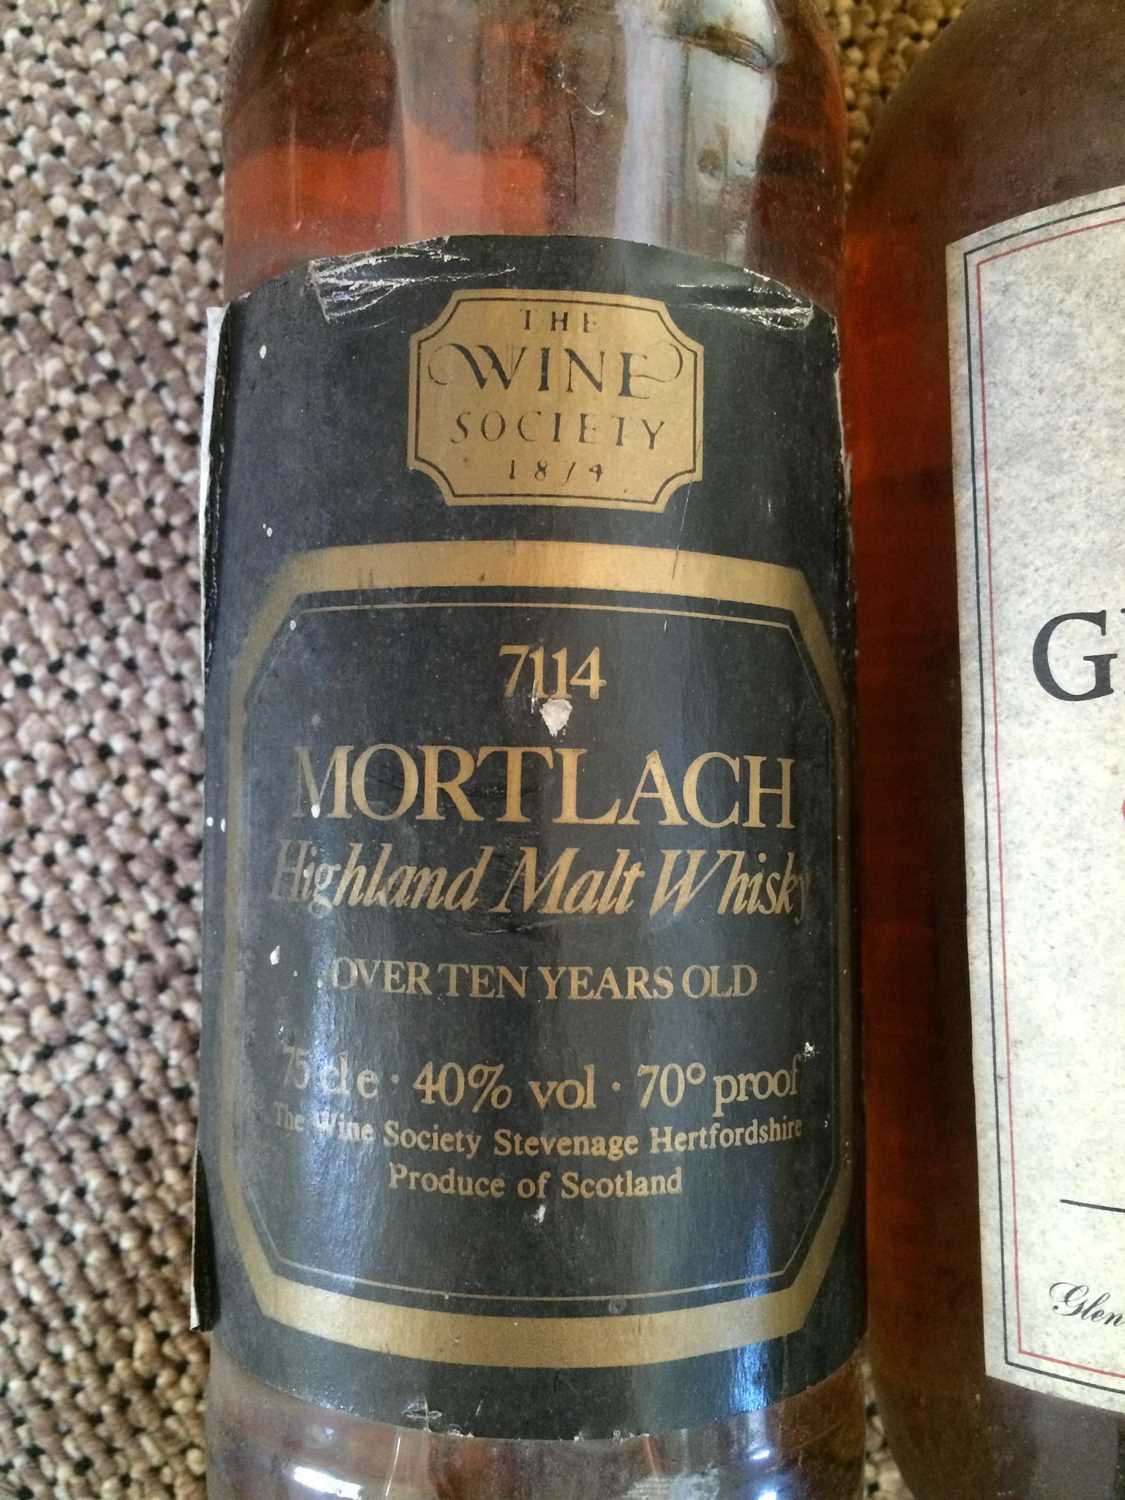 Mortlach Highland Malt Whisky, over ten years old, 1970s bottling for the Wine Society, 40% vol 75cl - Image 9 of 9